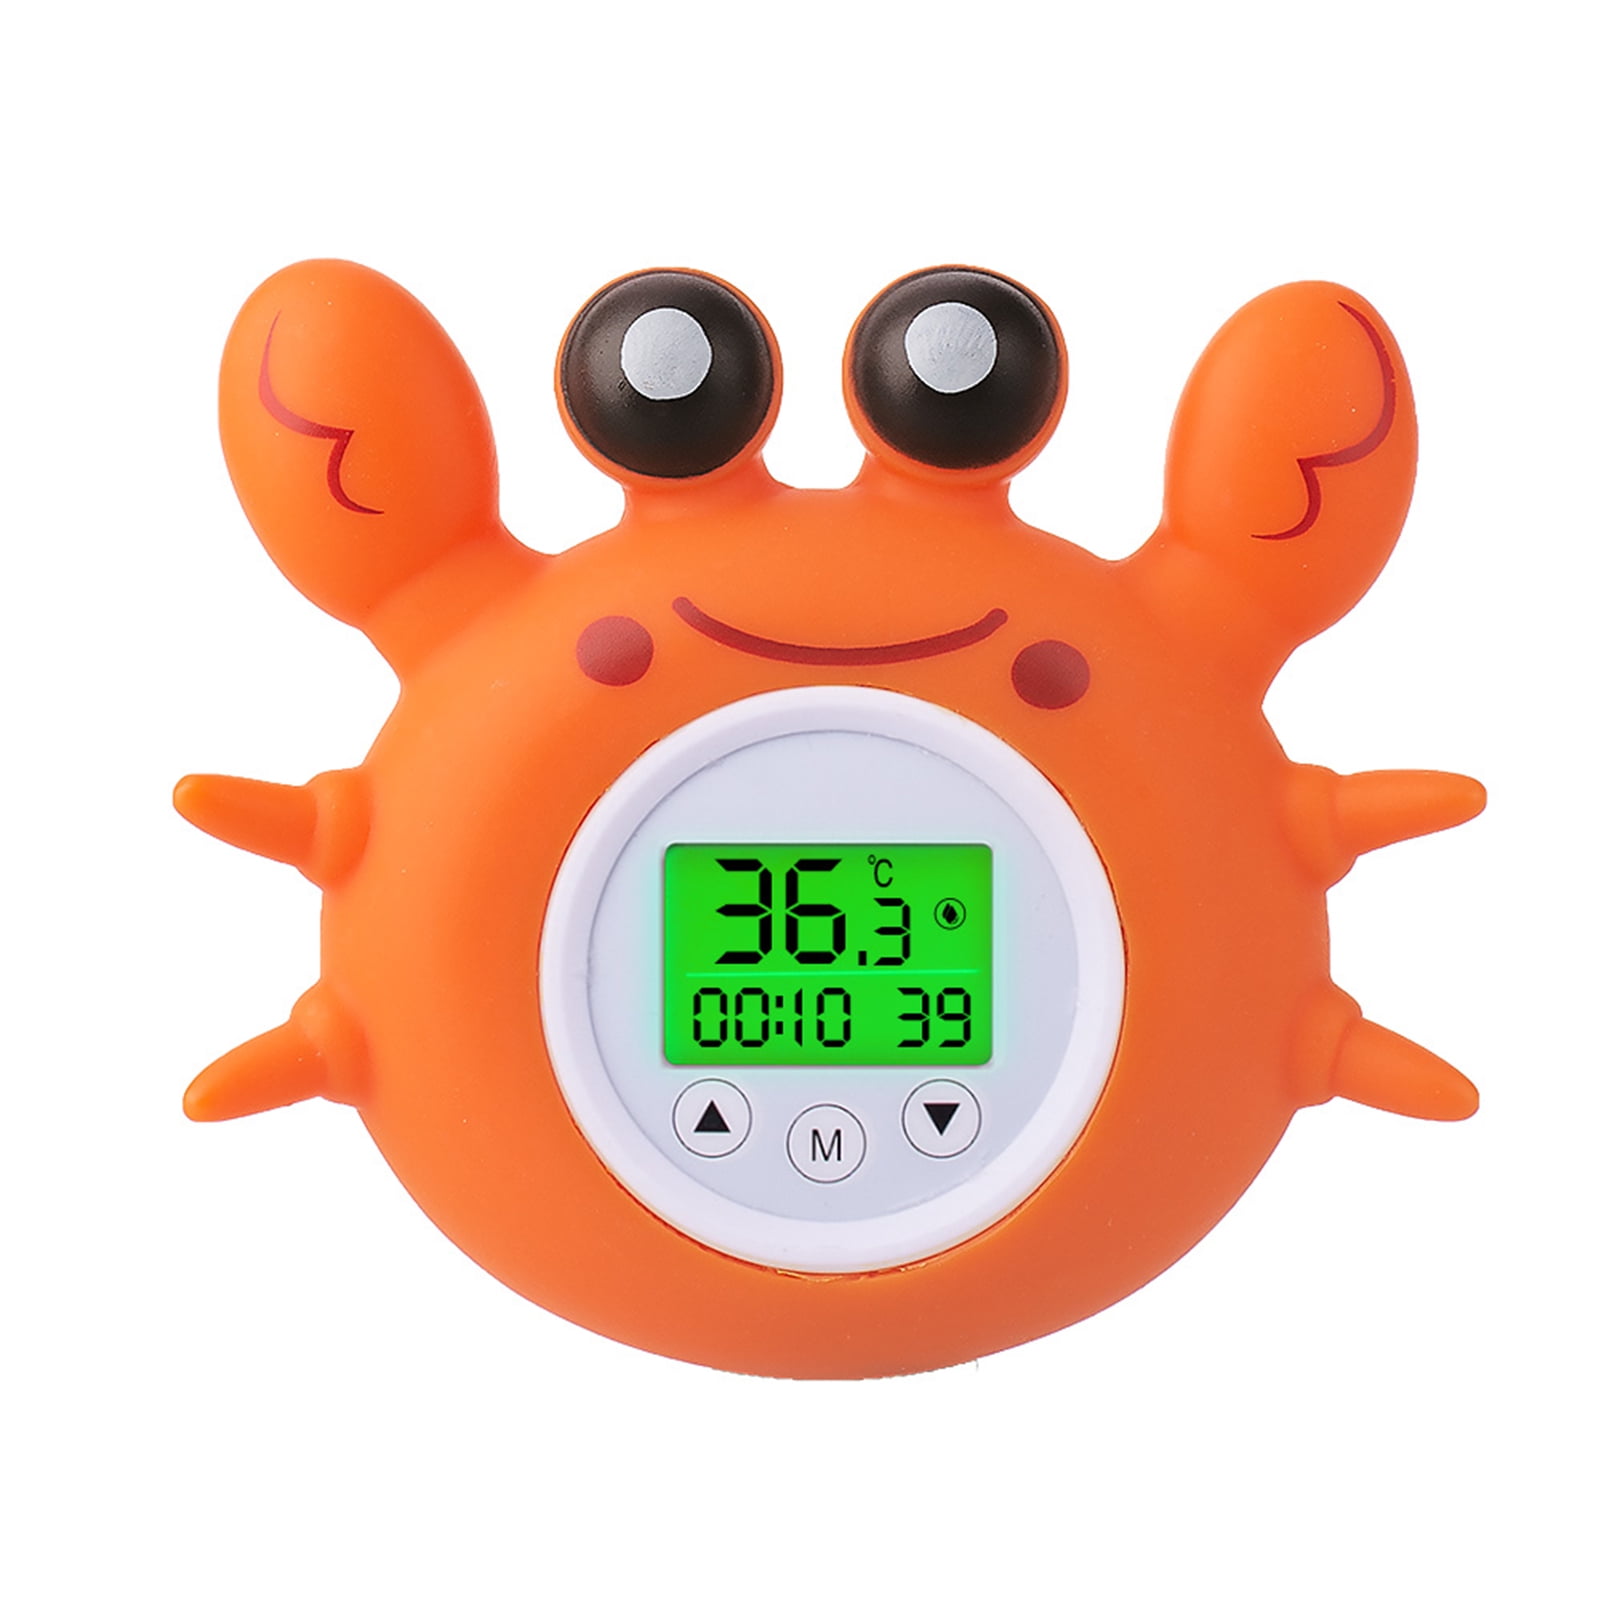 Health Bath Floating Toy Baby Bath Thermometer Temperature Alarm Floating Safety Temperature Thermometer 